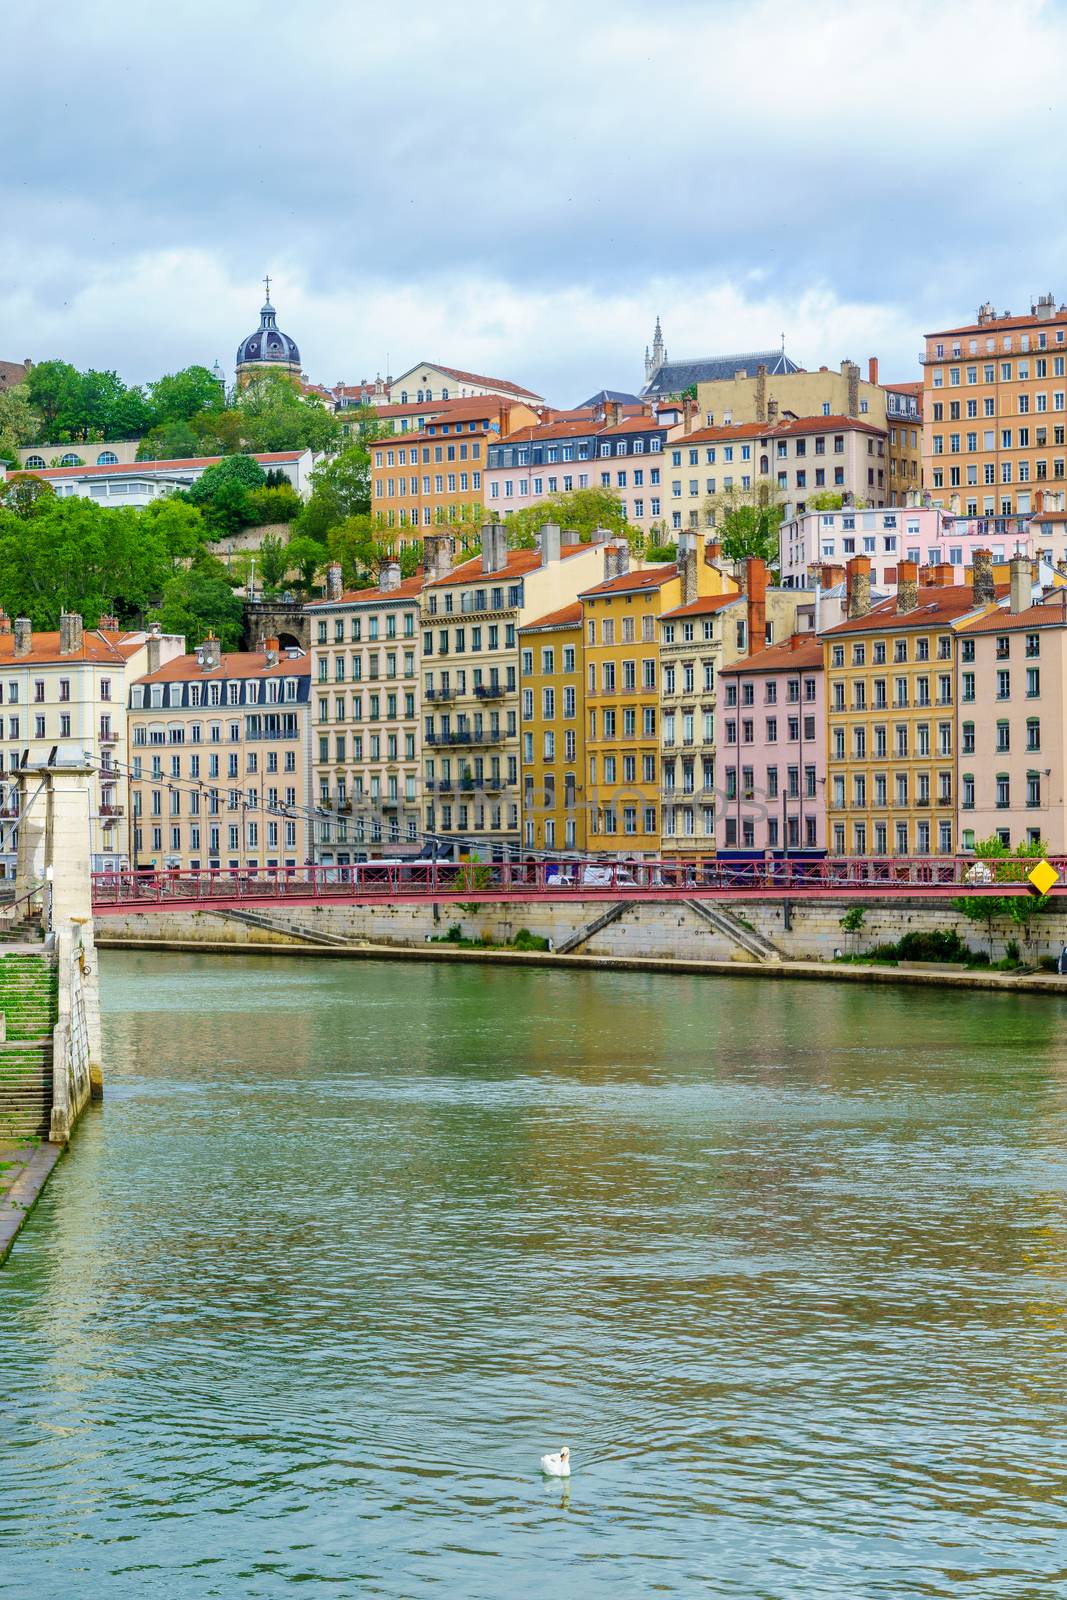 The Saint-Vincent bridge, over the Saone river, and colorful houses, in Lyon, France